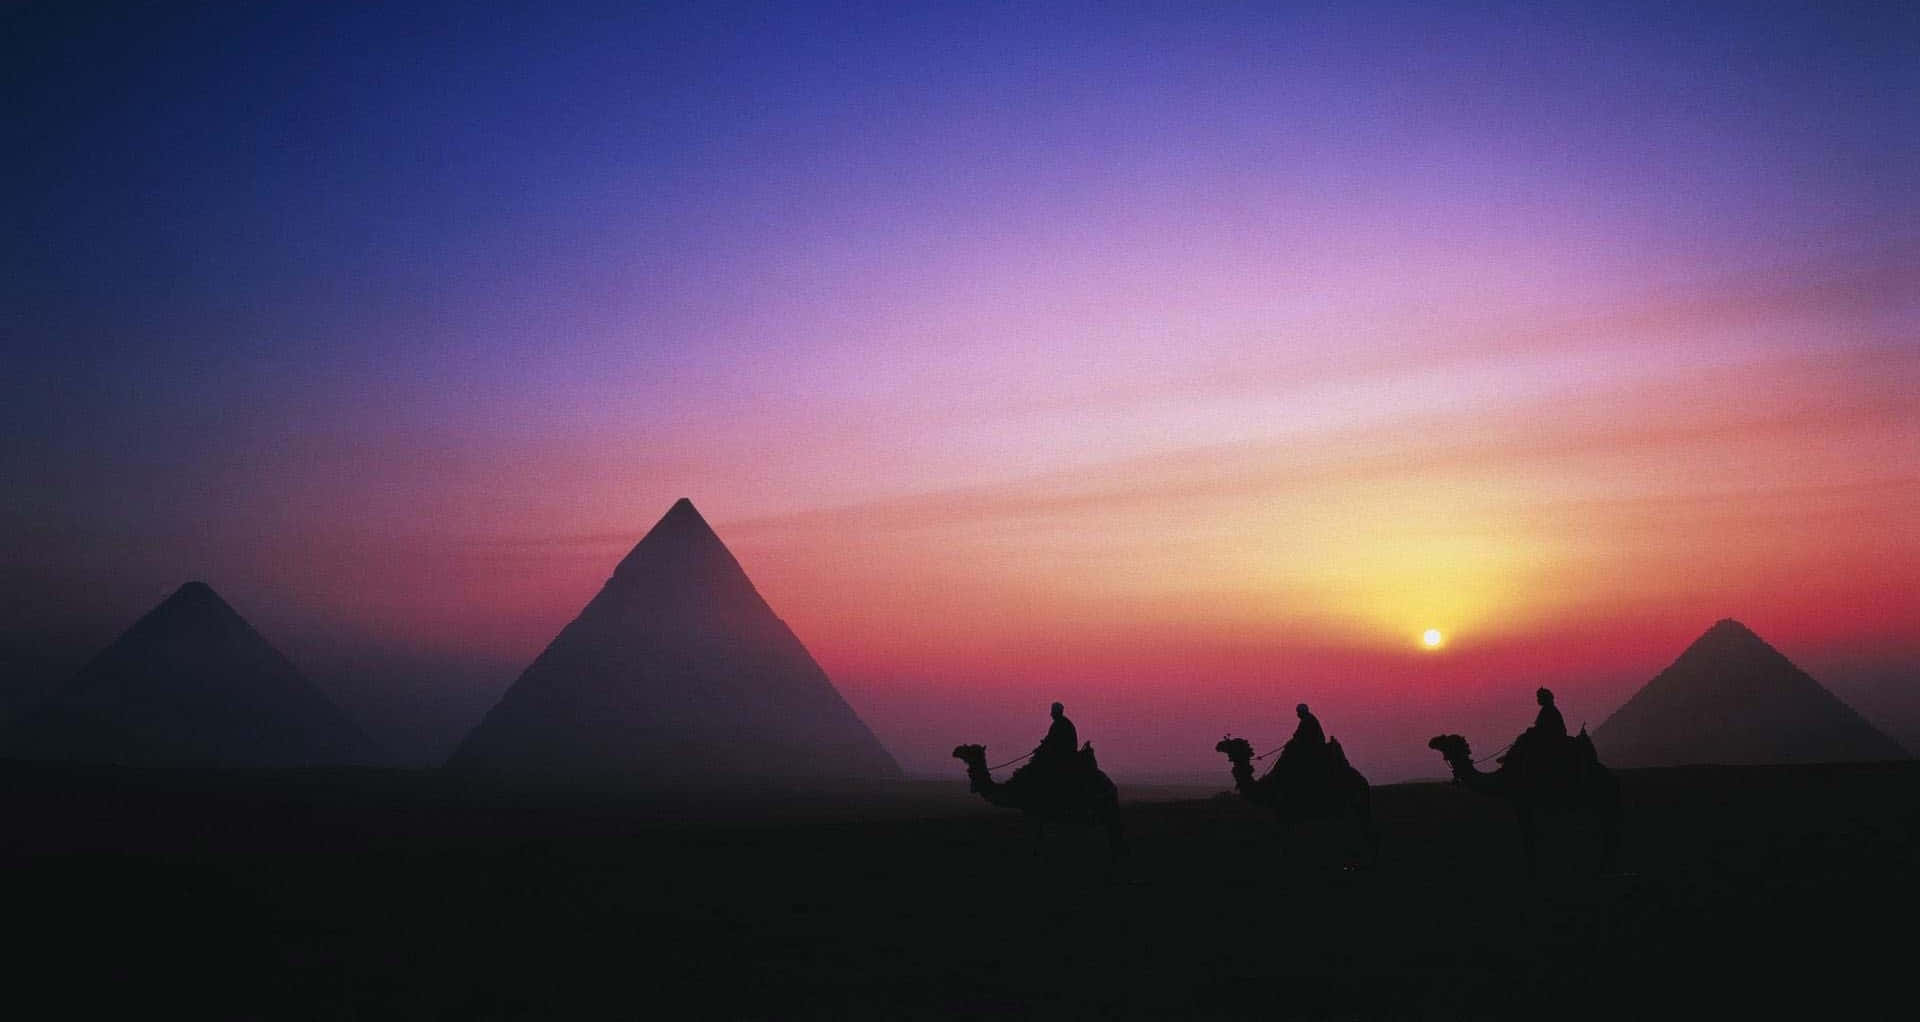 A Group Of Camels Are In Front Of The Pyramids At Sunset